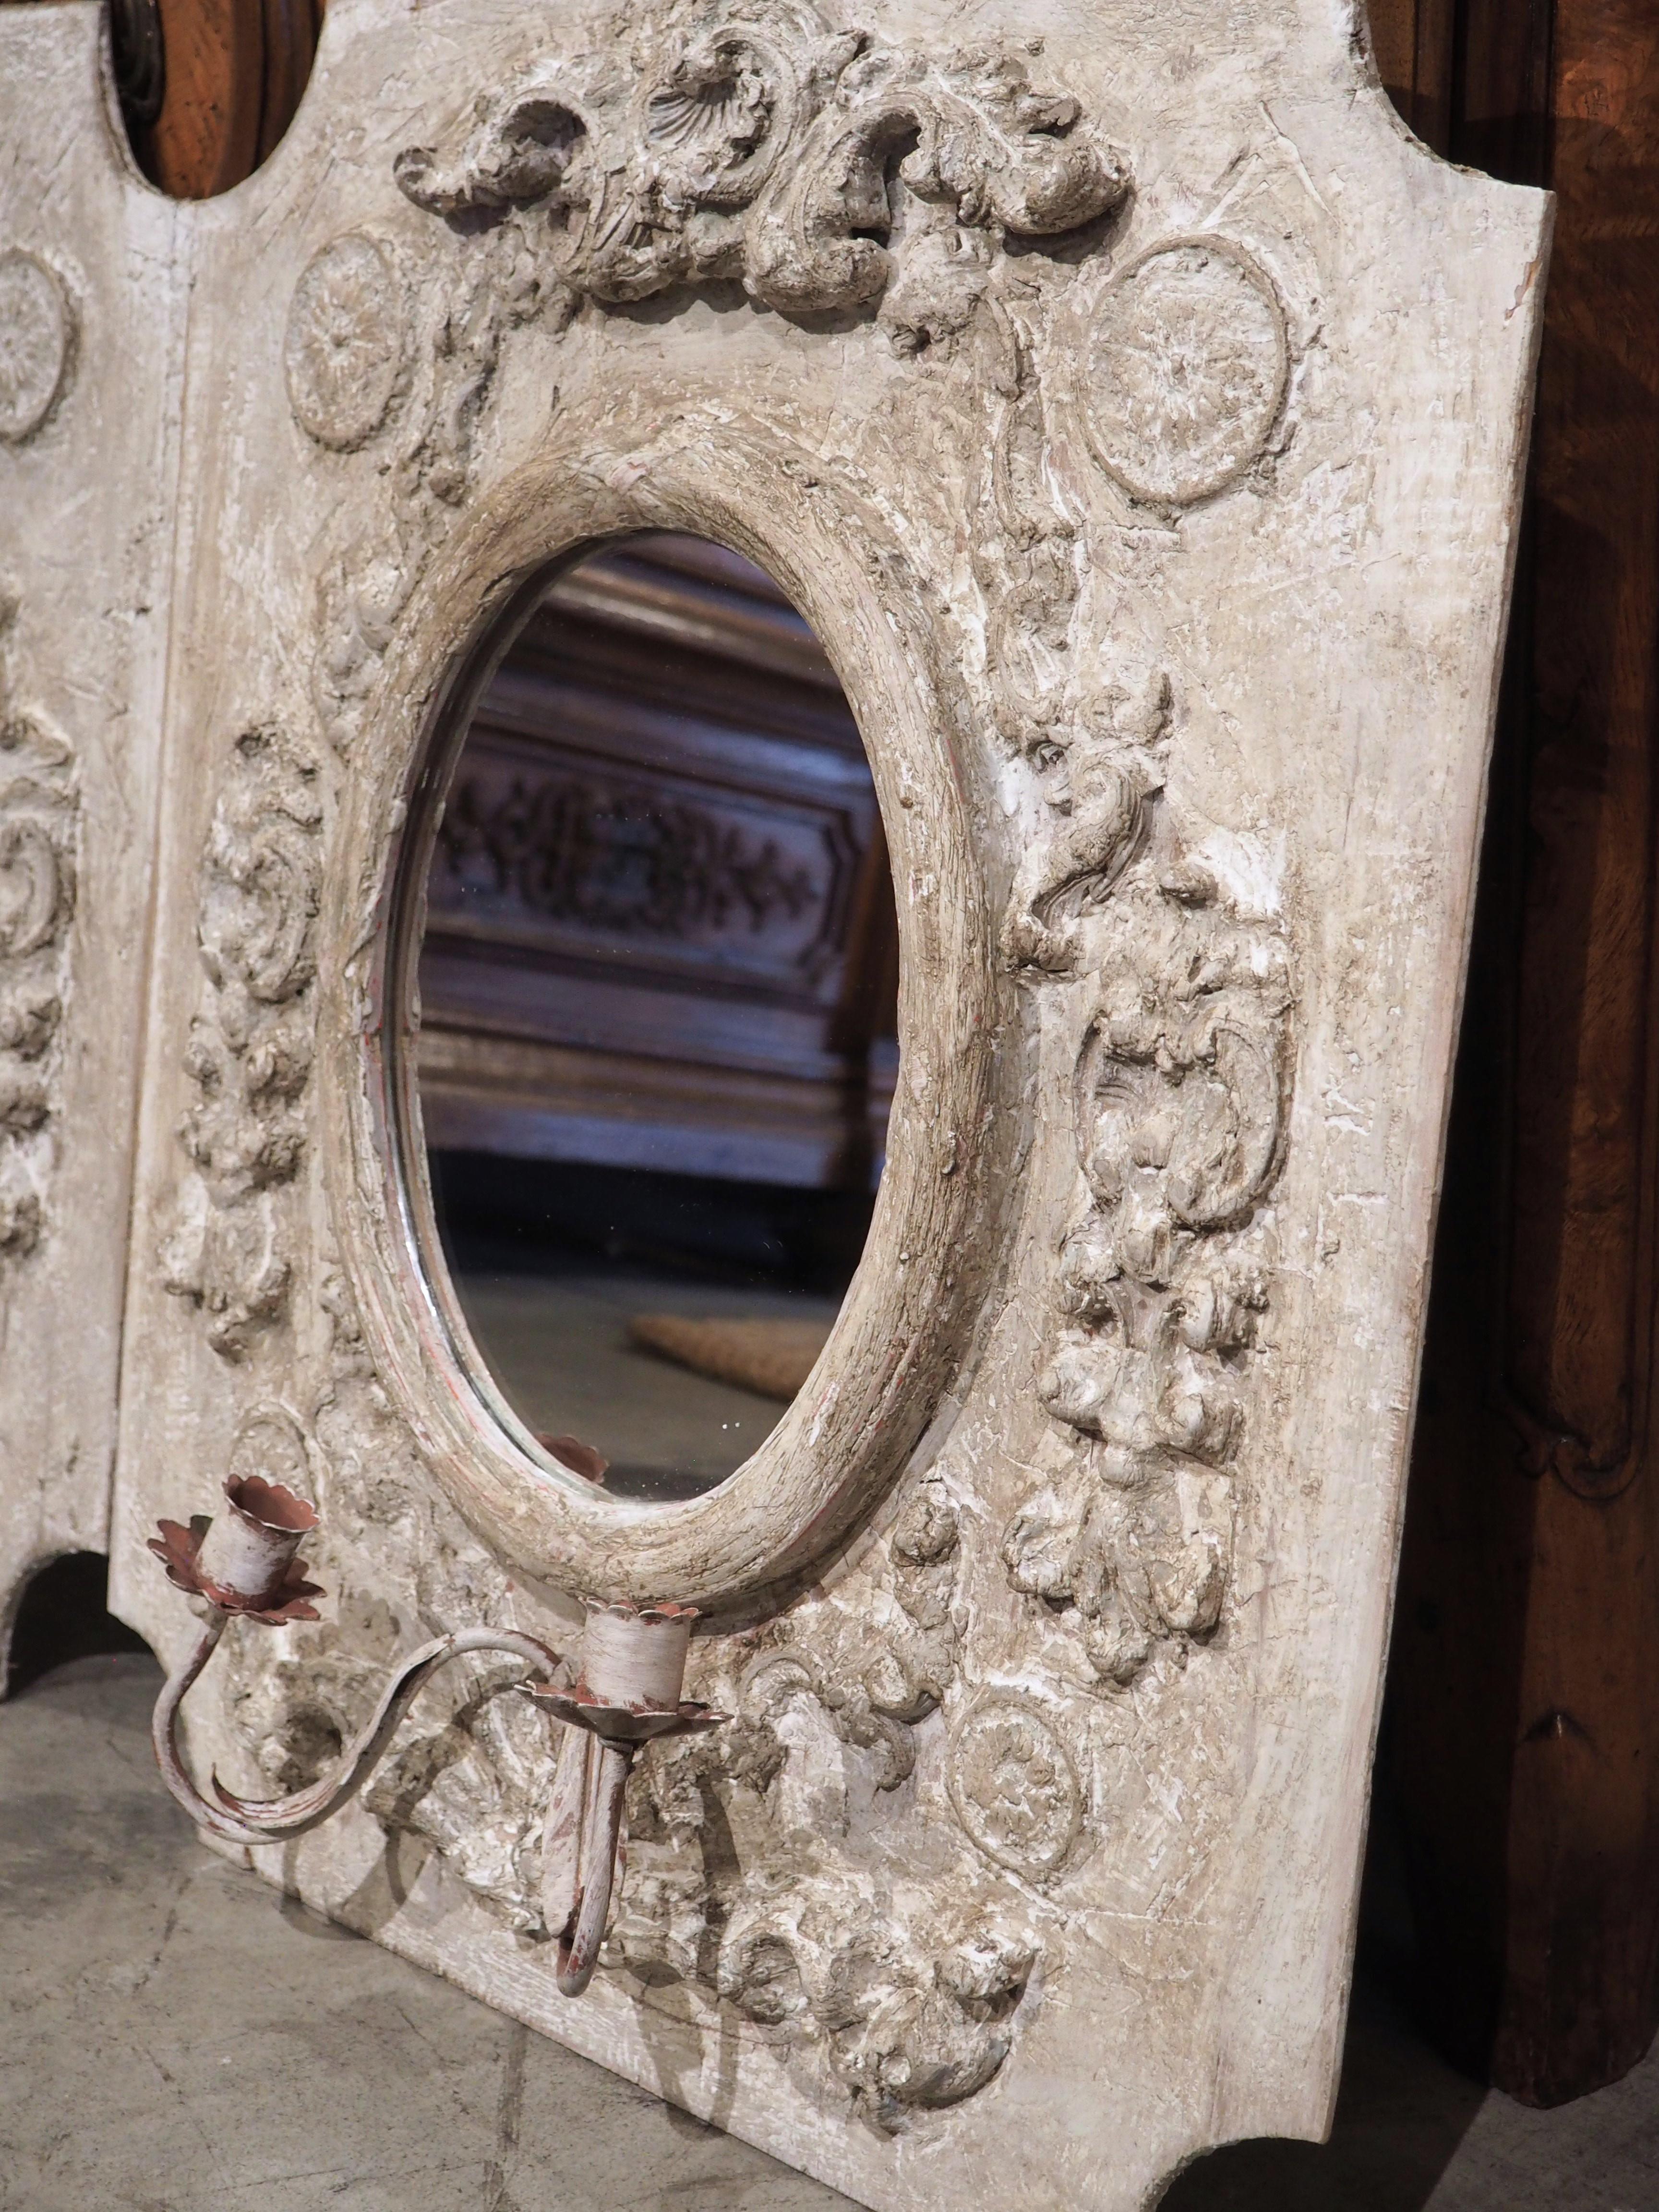 These small, painted Italian panels are sure to make a statement in any home. Meticulously hand-crafted in Florence, they feature oval mirrors and iron sconces finished with an antique white patina that gives them character and depth. Ornamentation